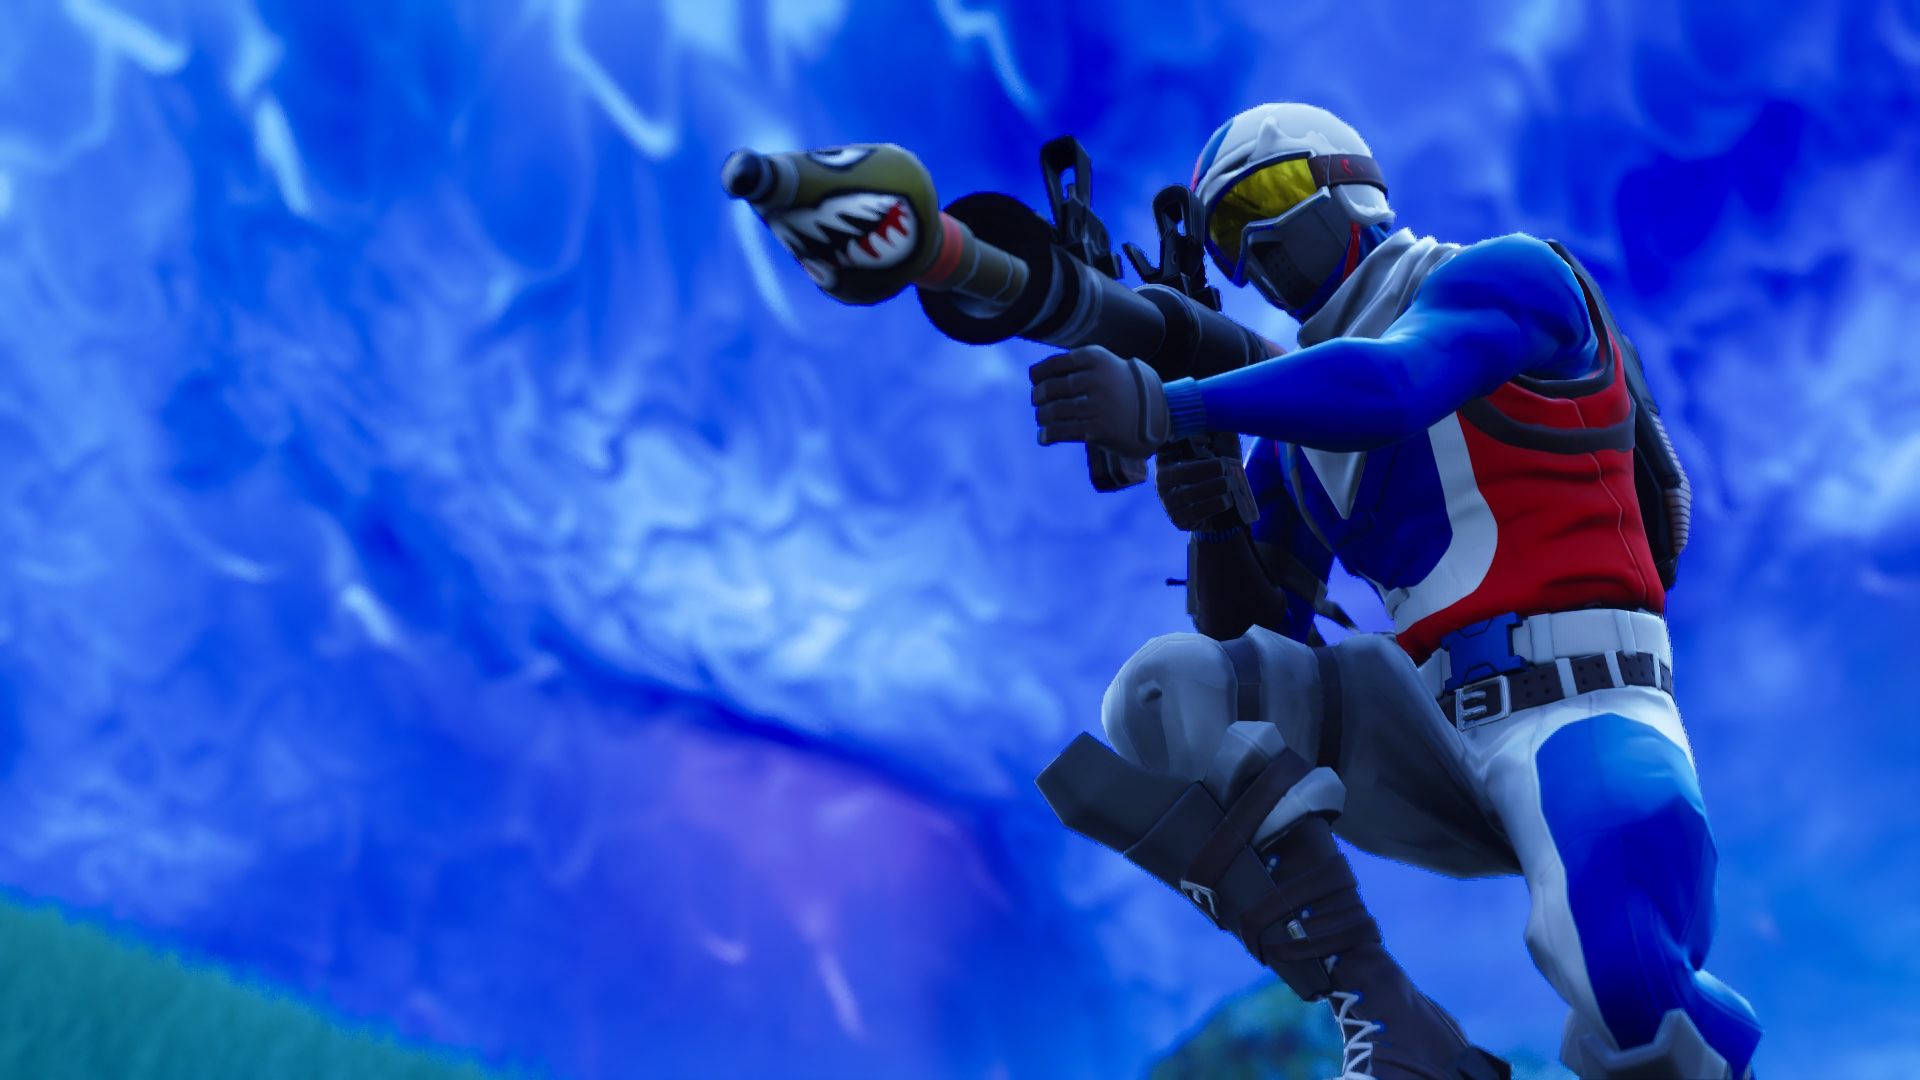 The Ace Fortnite Wallpapers